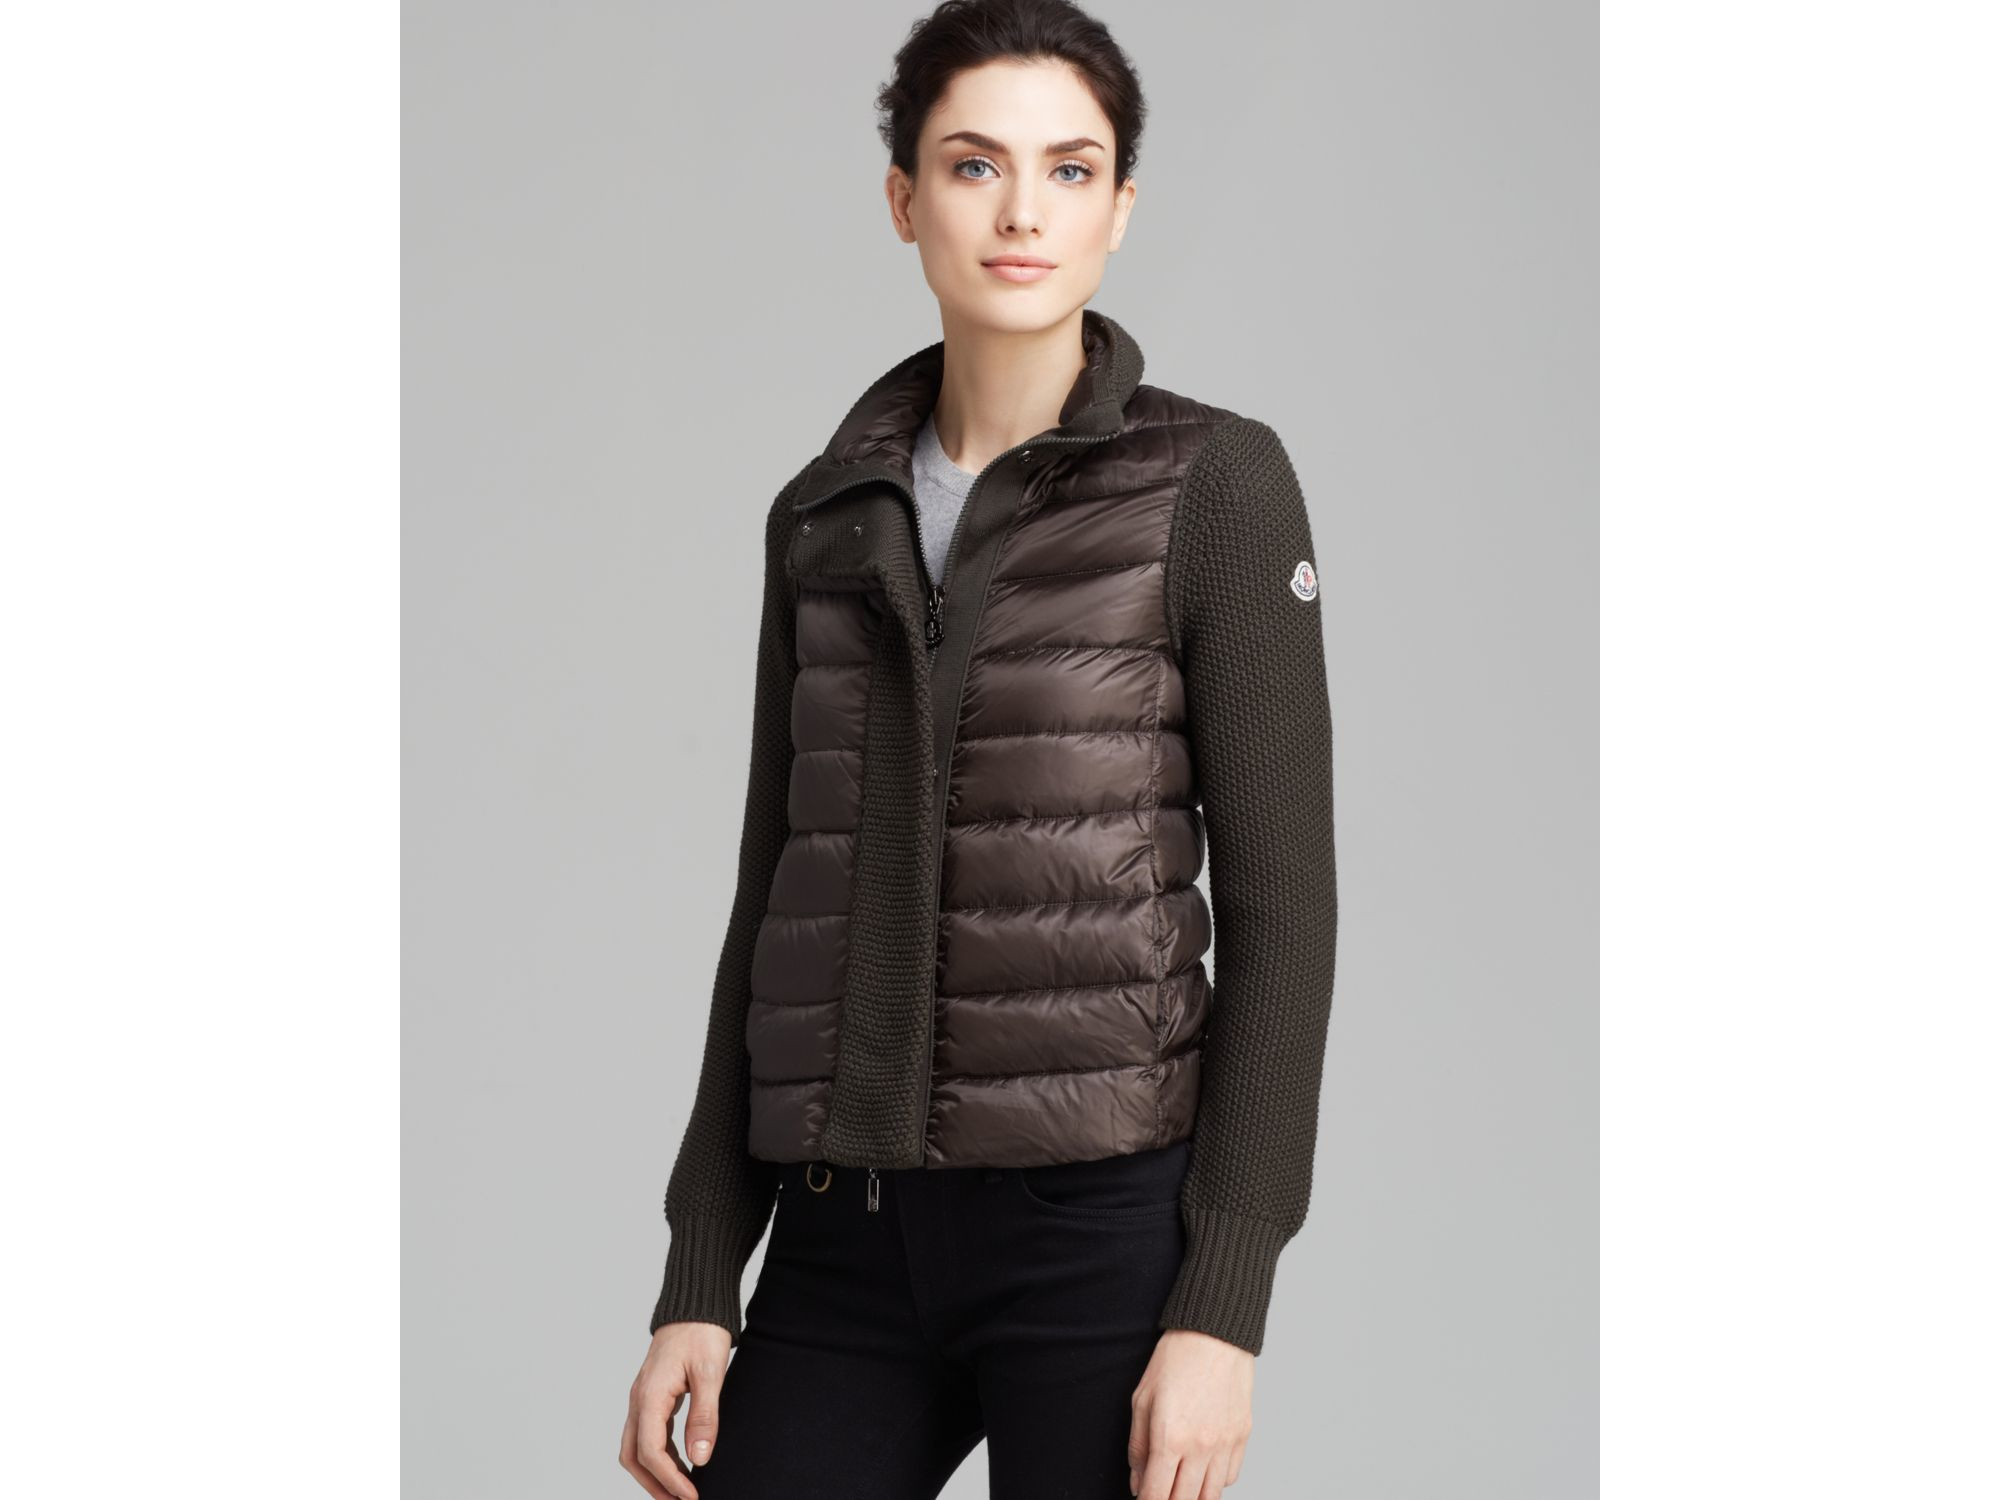 moncler maglione cardigan